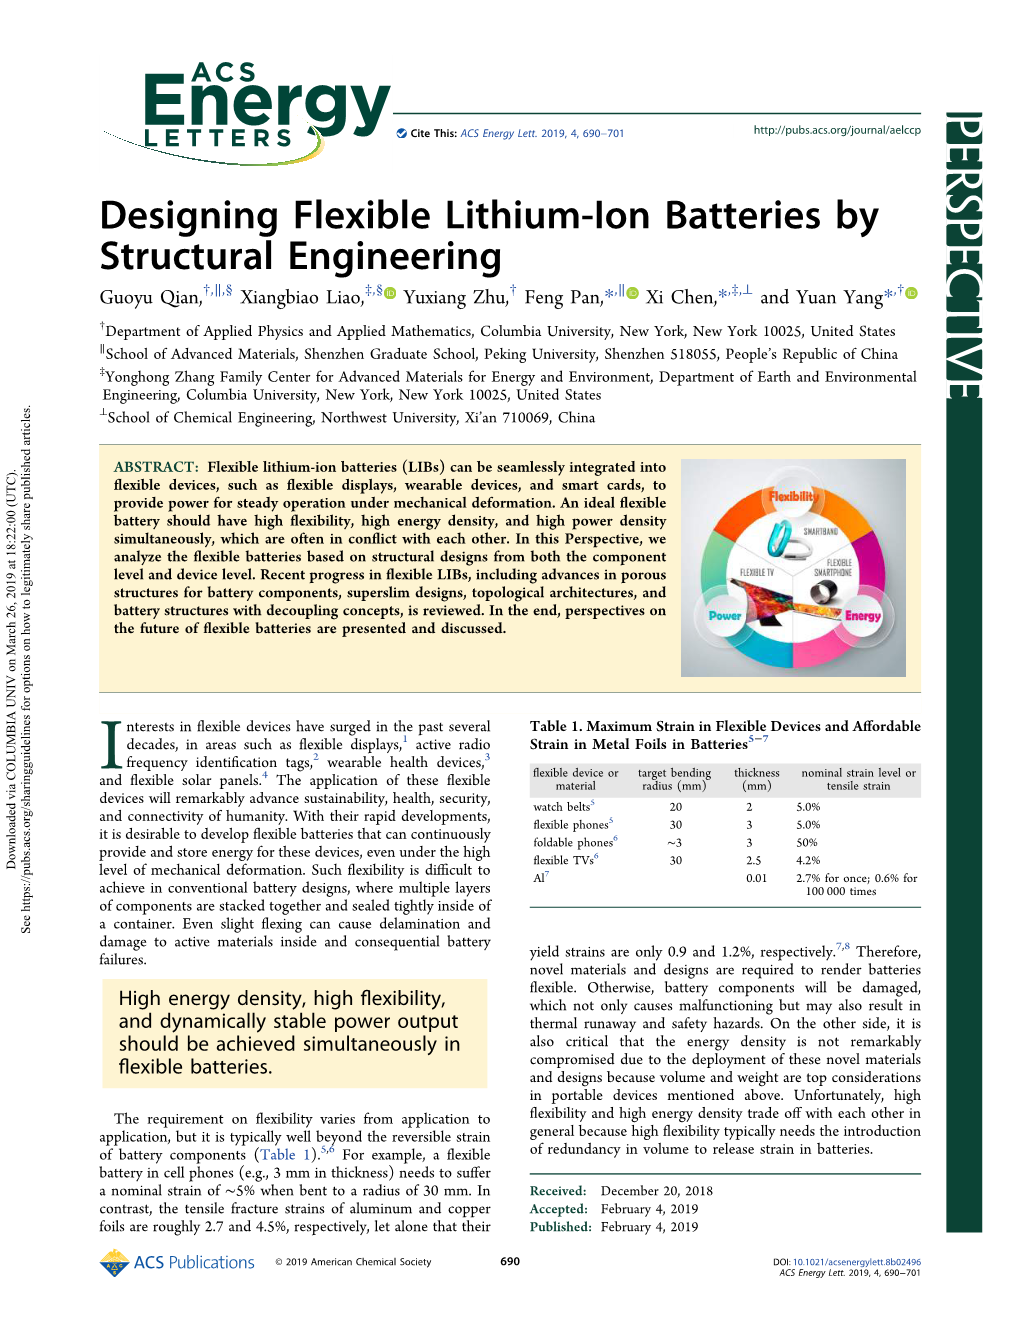 Designing Flexible Lithium-Ion Batteries by Structural Engineering